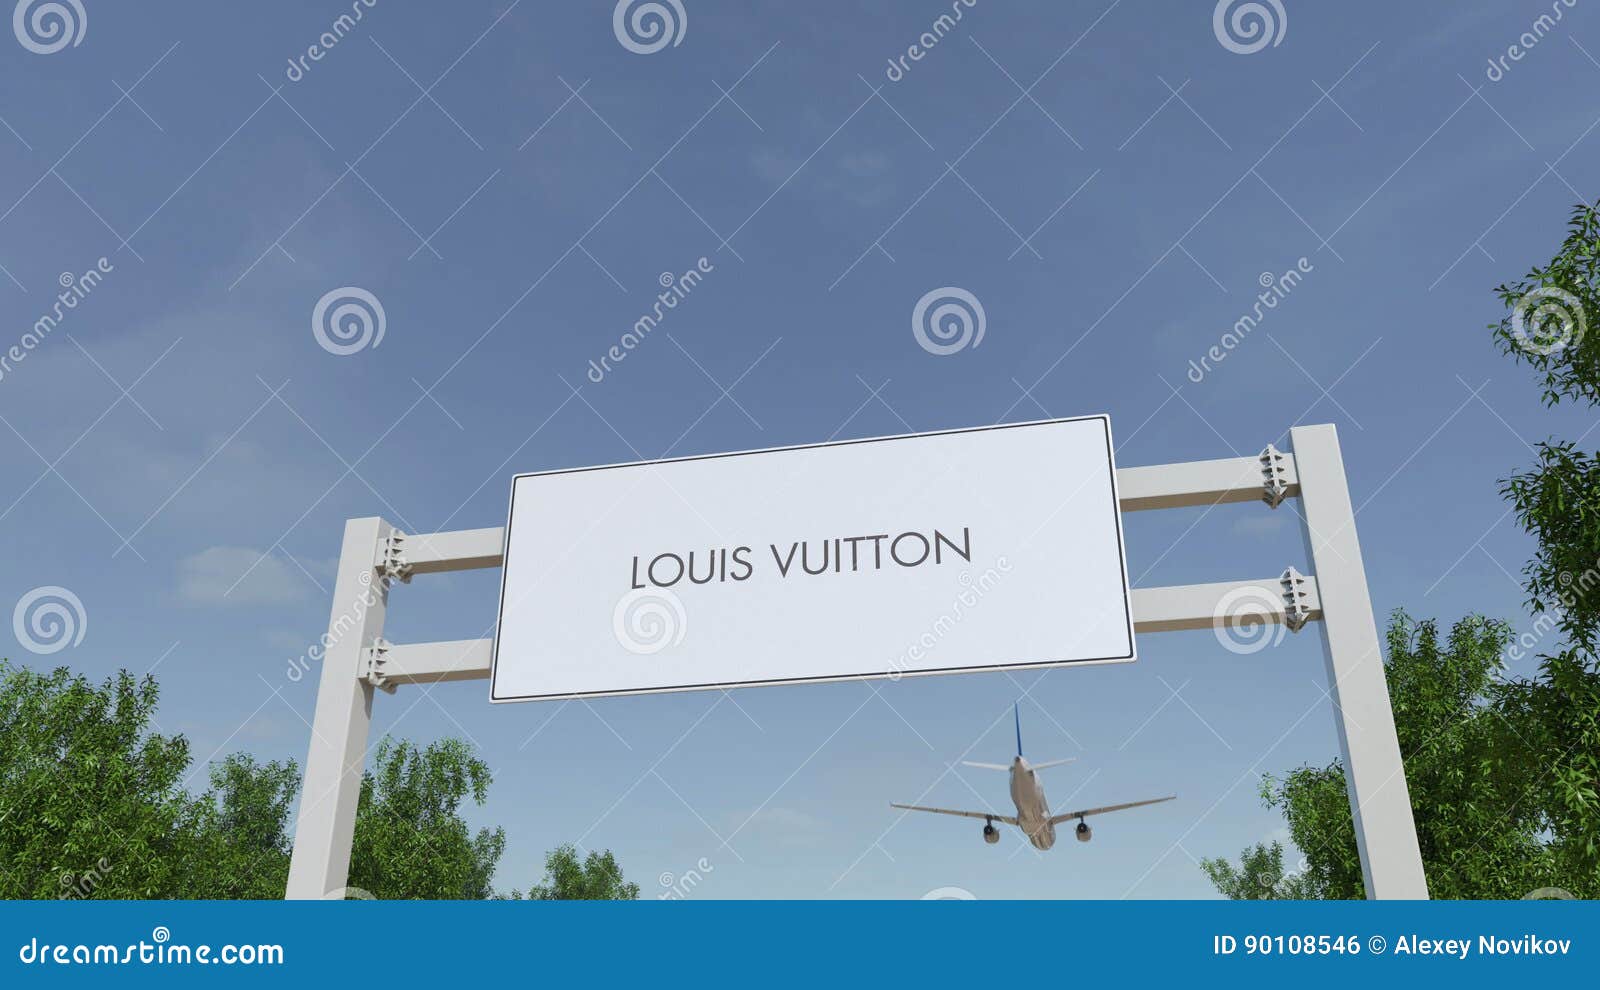 Airplane Flying Over Advertising Billboard with Louis Vuitton Logo